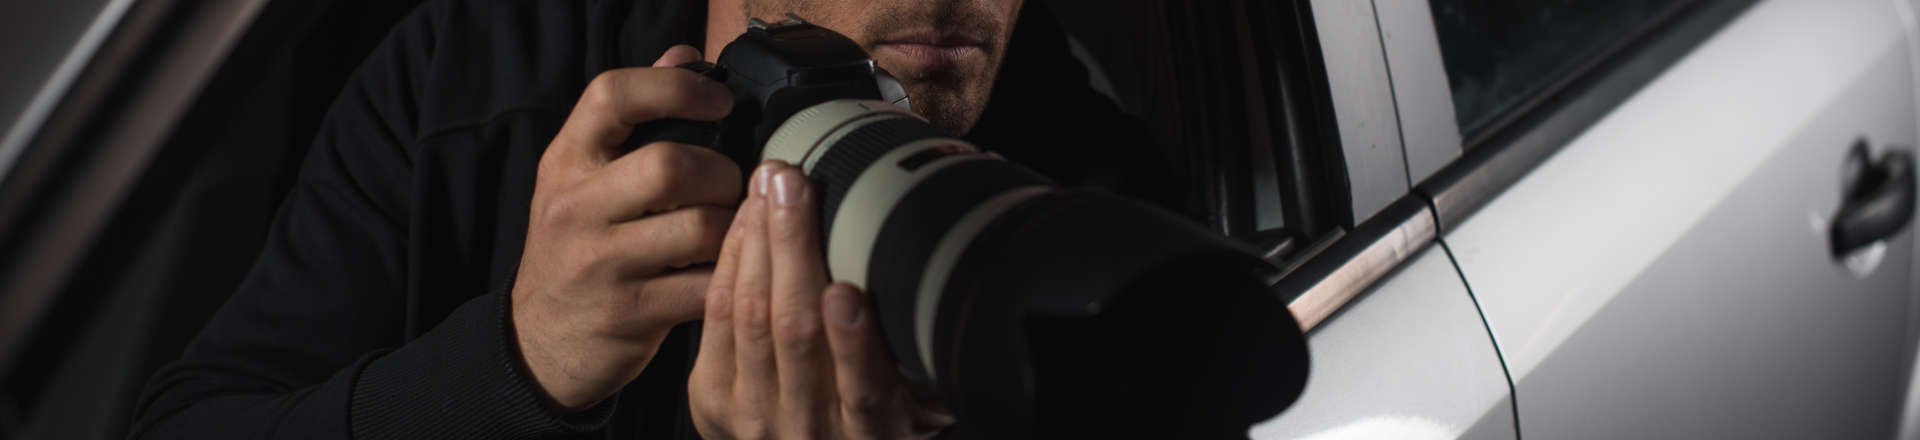 Common Reasons You Might Need a Private Investigator West Hollywood, CA